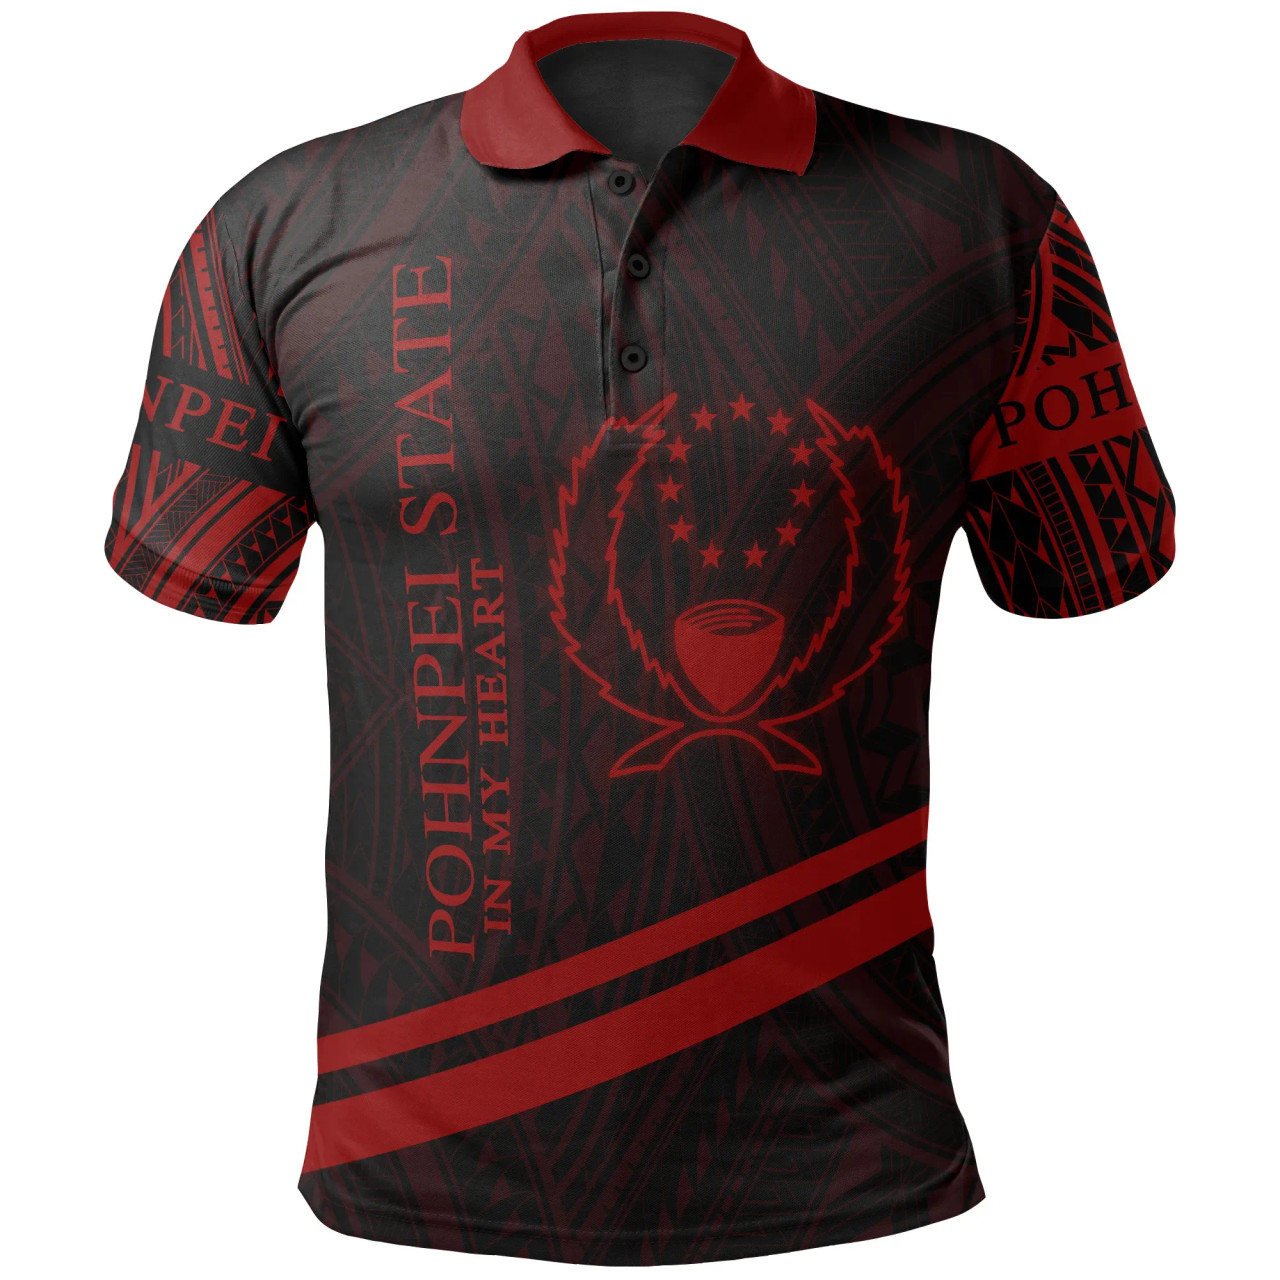 Pohnpei State Polo Shirt - In My Heart Style Red Polynesian Patterns 1